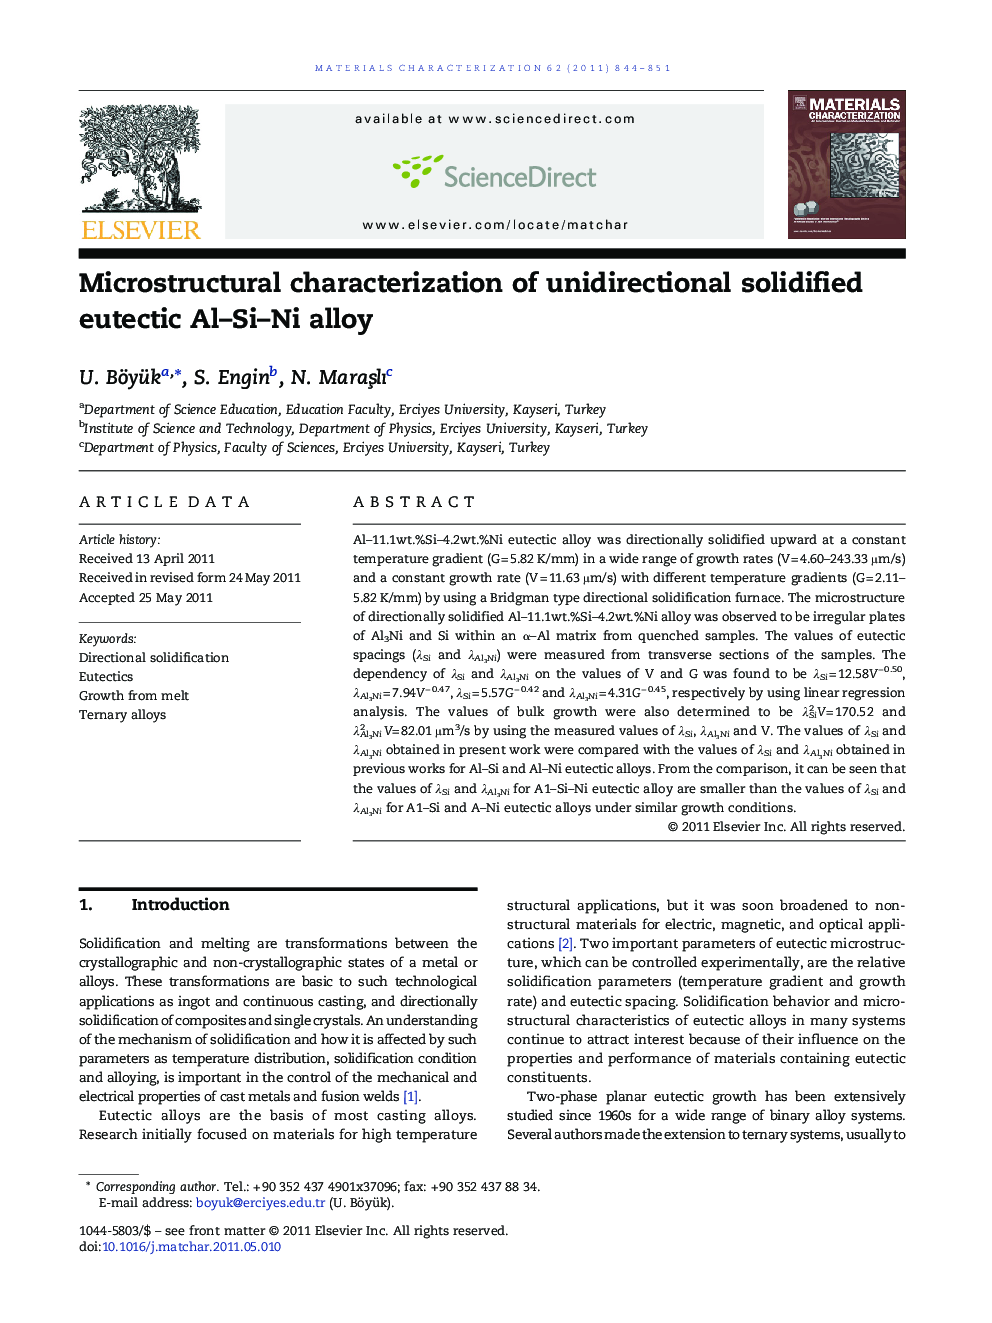 Microstructural characterization of unidirectional solidified eutectic Al–Si–Ni alloy